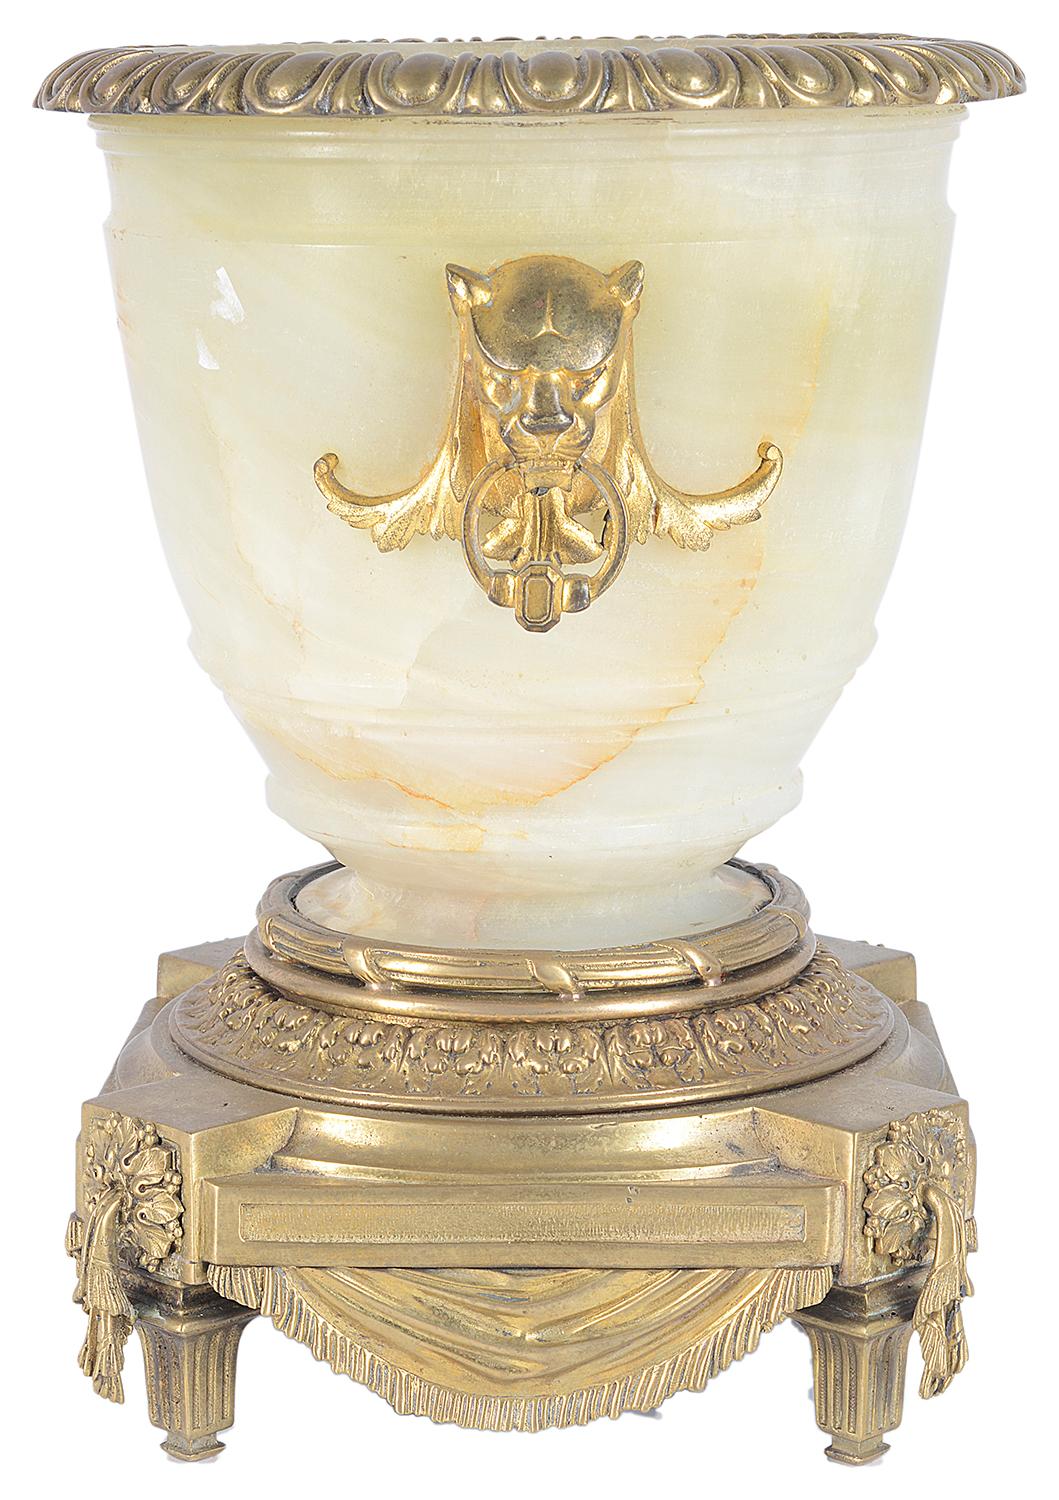 A good quality 19th century classical Alabaster and gilded ormolu urn. Having an egg and dart moulded ormolu rim, Leopard mask ring drop handles on either side, translucent Alabaster to the urn and raised a classical platform base with swag